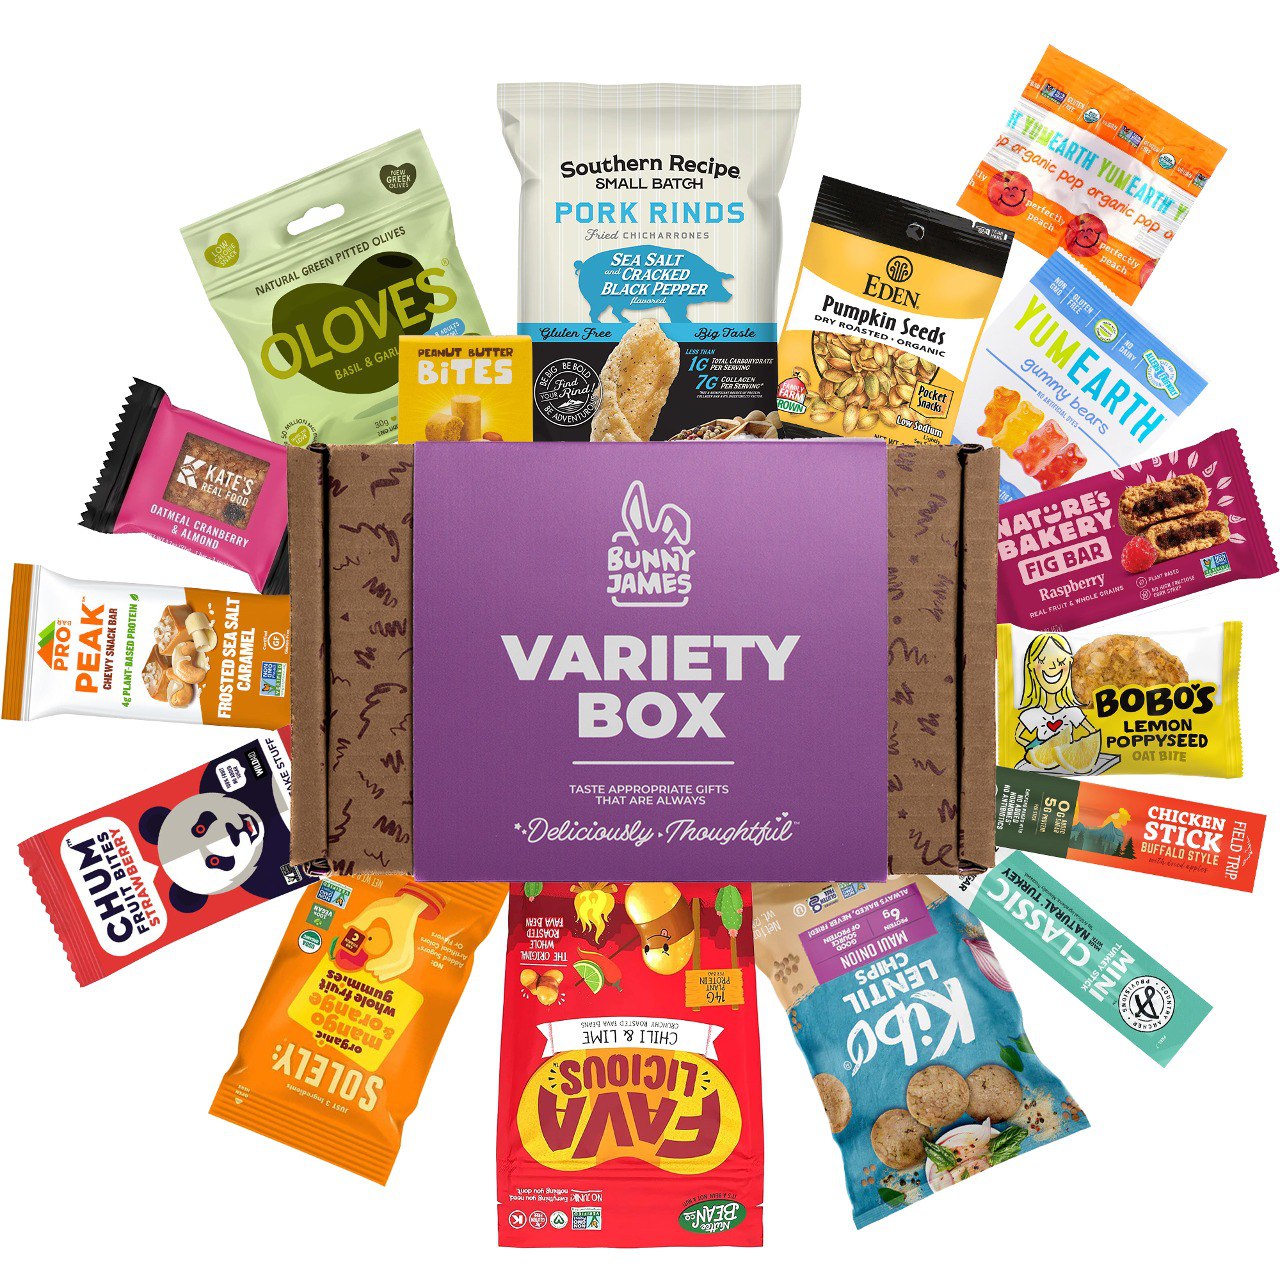 Bunny James Variety Snacks Sampler – The Ultimate Collection of Healthy Snacks for Every Lifestyle